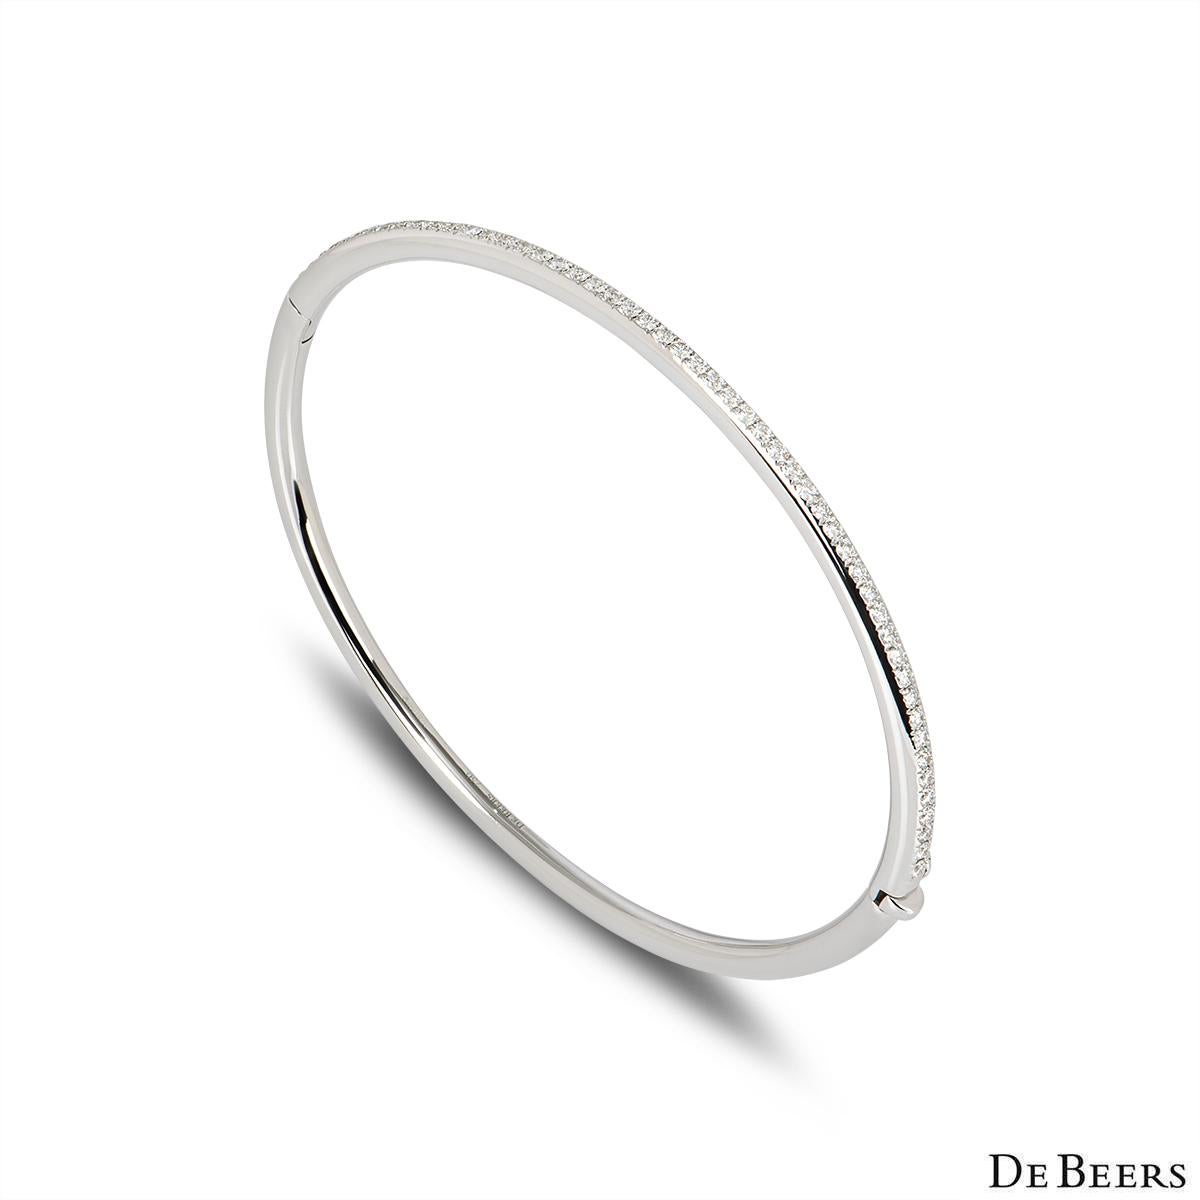 A timeless 18K white gold classic diamond bangle by De Beers. This bangle features 52 micropavé set round brilliant cut diamonds totalling 0.64ct, predominately F-G colour and VS clarity. The bangle fits a wrist size of up to 16cm, finishes with a